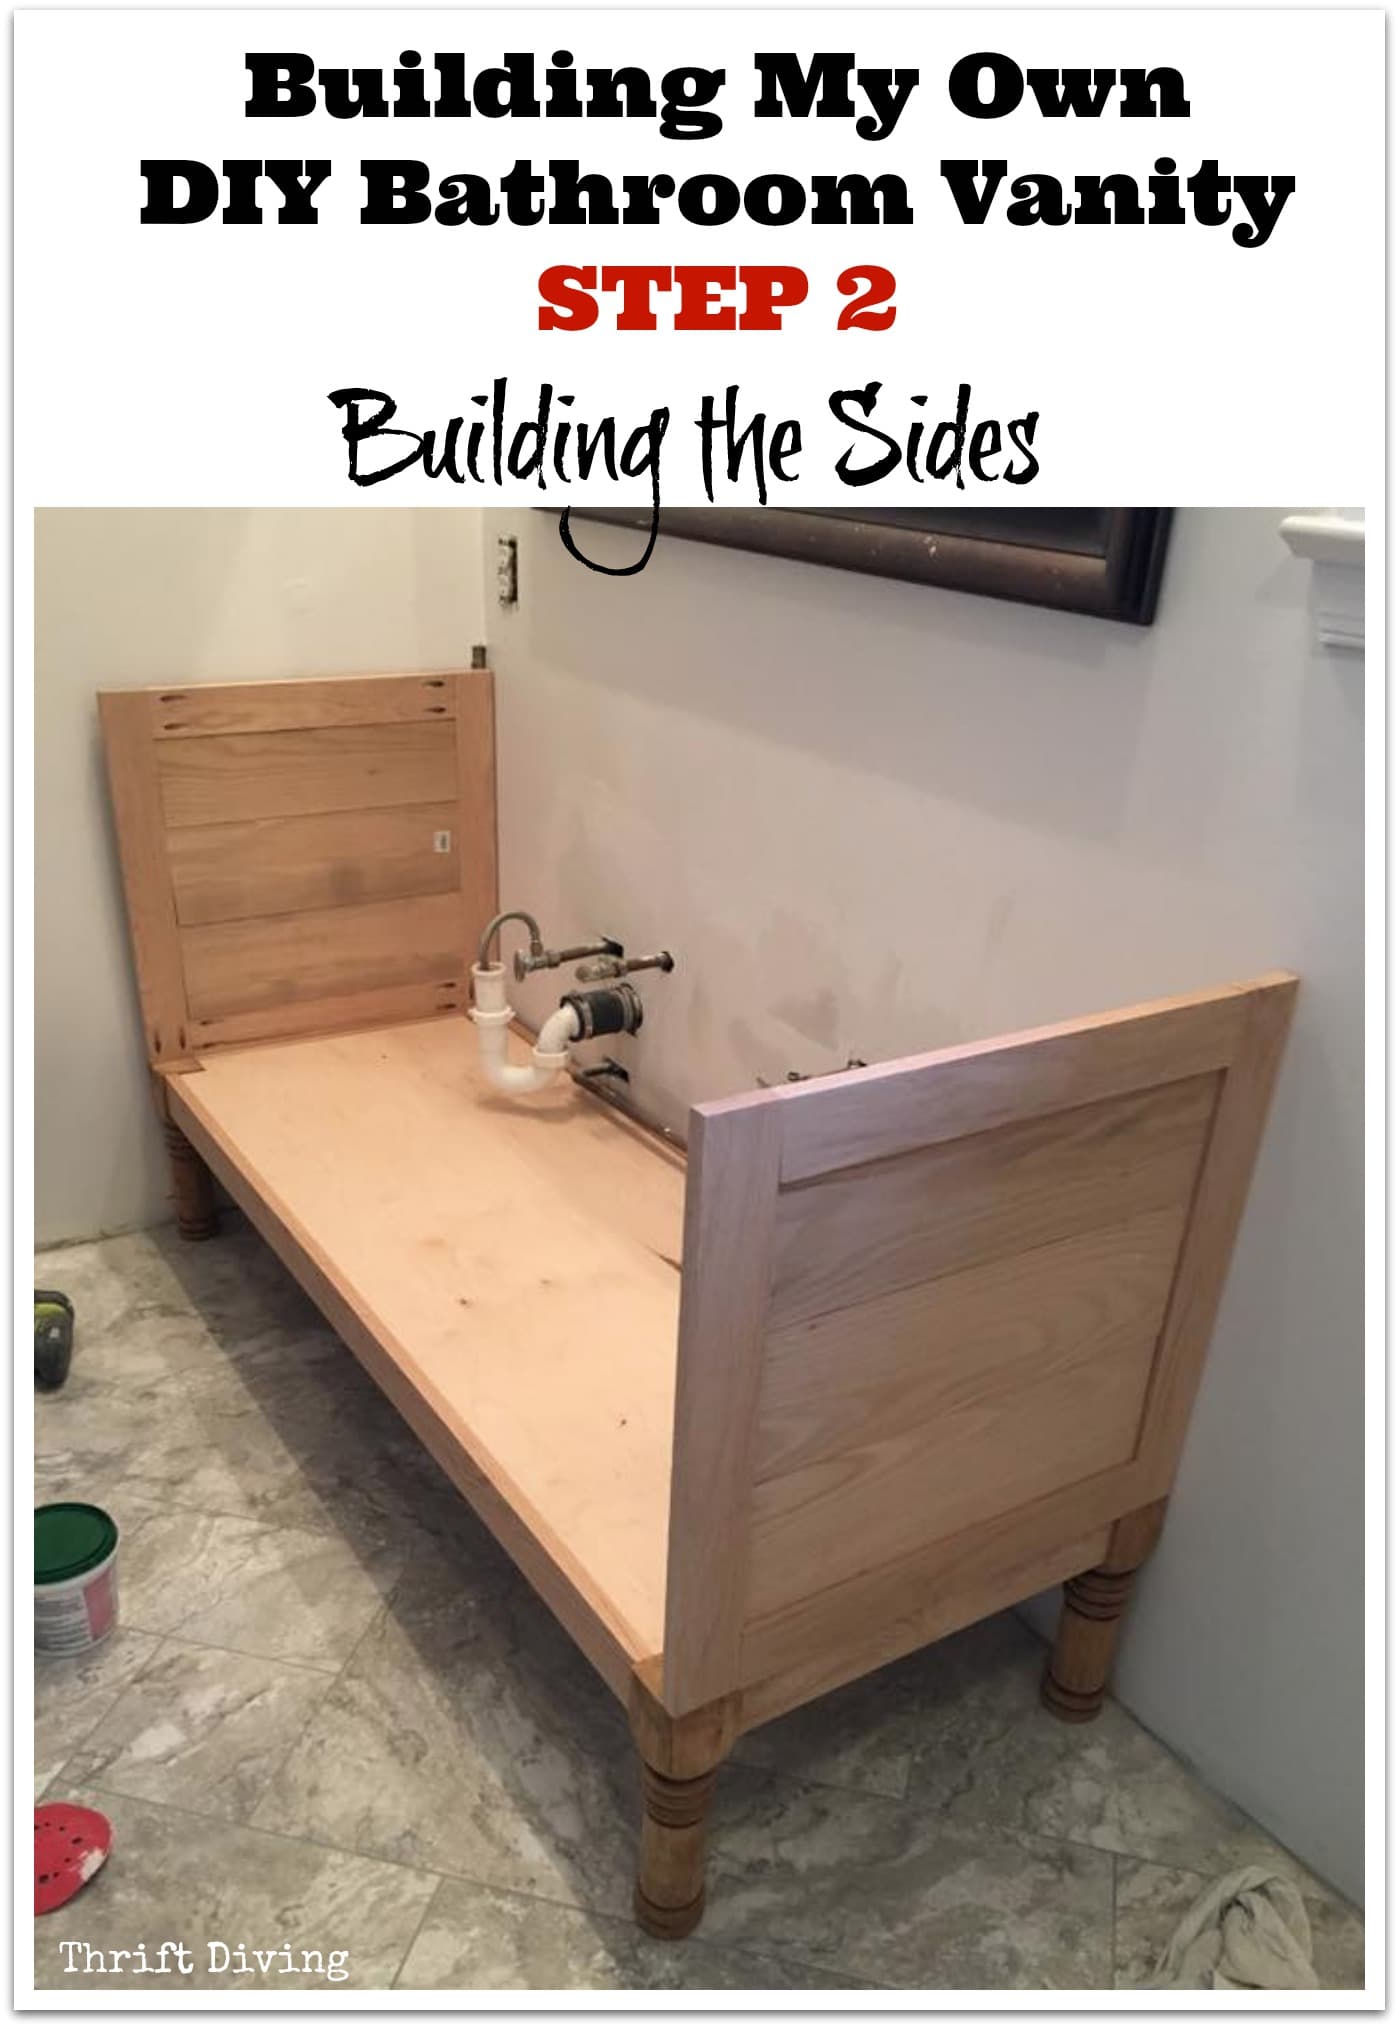 Building My Own DIY Bathroom Vanity - STEP 2 - Building the Sides. See the entire series and tutorials! - Thrift Diving